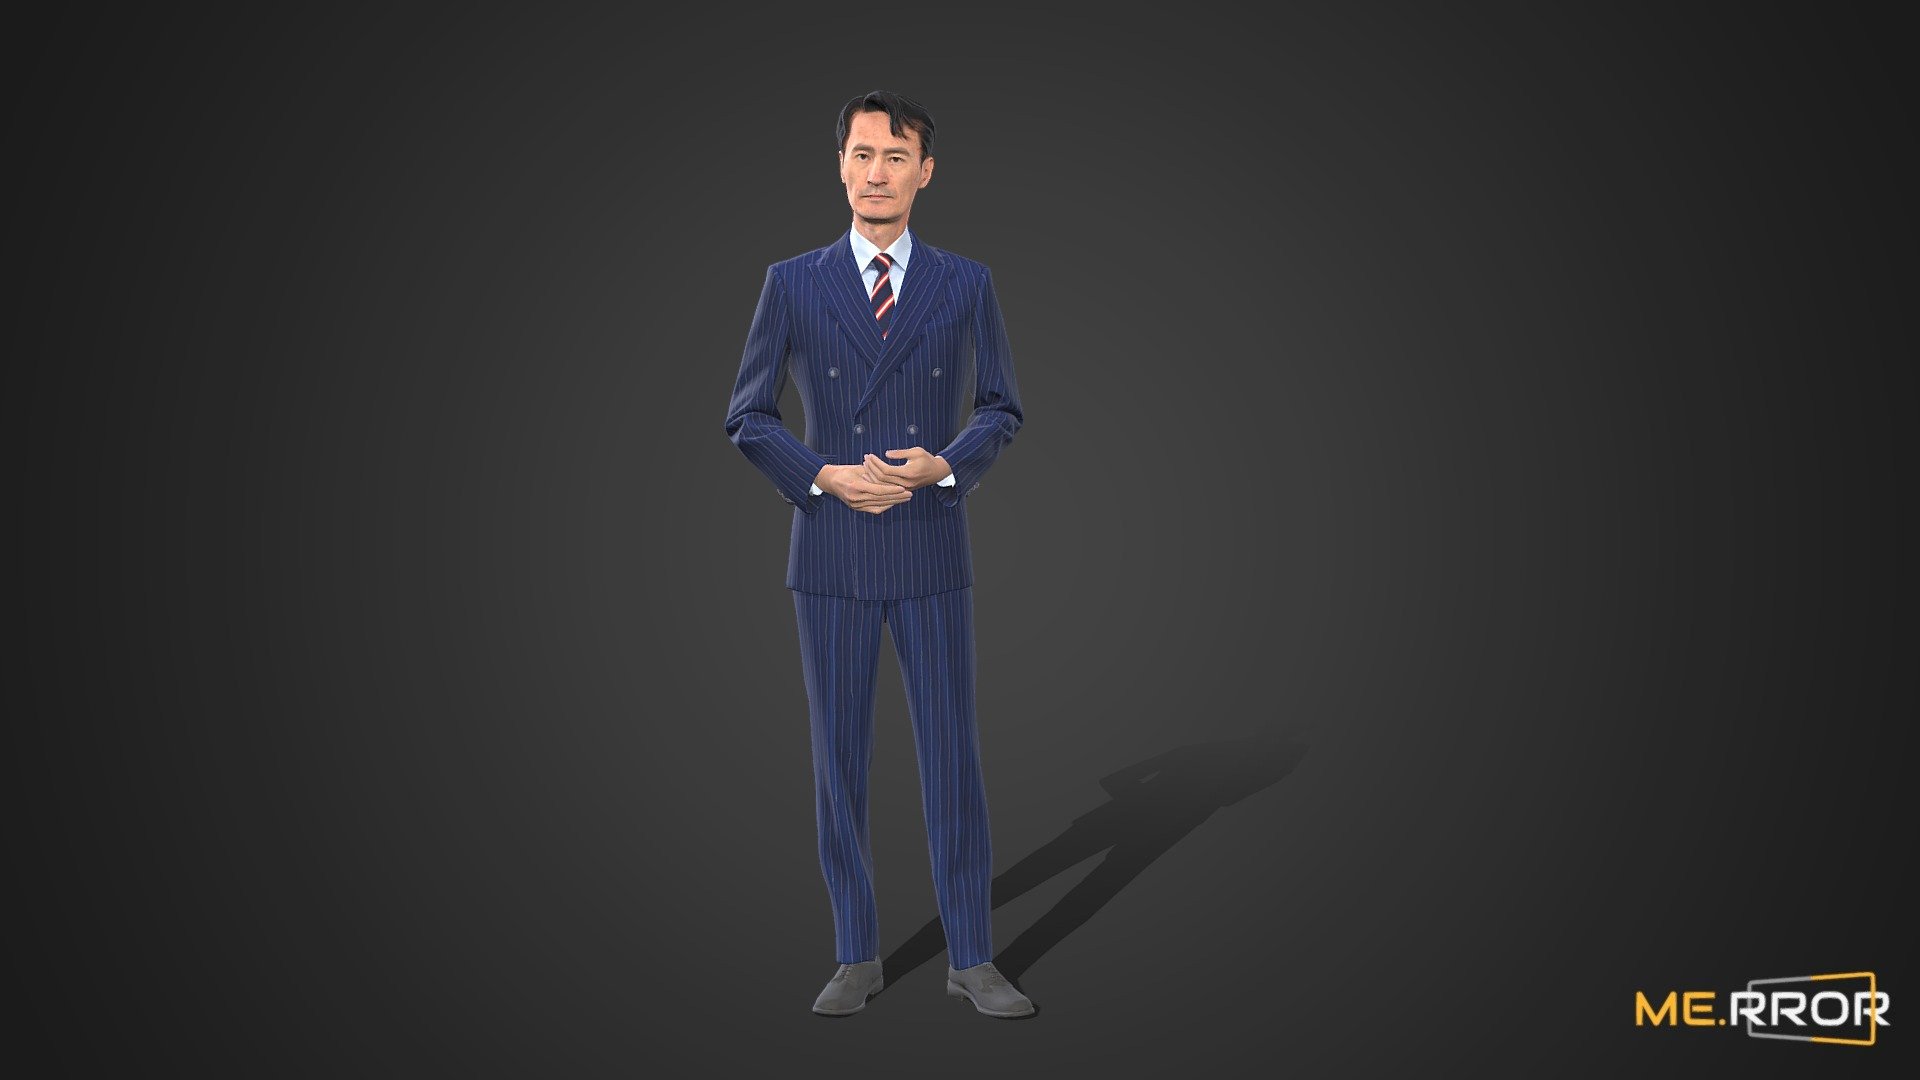 ME.RROR


From 3D models of Asian individuals to a fresh selection of free assets available each month - explore a richer diversity of photorealistic 3D assets at the ME.RROR asset store!

https://me-rror.com/store




[Model Info]




Model Formats : FBX,MAX


Texture Maps (8K) : Diffuse




Find Scanned - 2M poly version here: https://sketchfab.com/3d-models/asian-man-scan-posed-12-2m-poly-6a2c51b74ec941b8b85c3f7497c0816d



Find Scanned - TPO version here: https://sketchfab.com/3d-models/game-ready-asian-man-scan-posed-12-01ebb1b6cbdf4f15b473bf7116fcd4d5

If you encounter any problems using this model, please feel free to contact us. We'd be glad to help you.



[About ME.RROR]

Step into the future with ME.RROR, South Korea's leading 3D specialist. Bespoke creations are not just possible; they are our specialty.

Service areas:




3D scanning

3D modeling

Virtual human creation

Inquiries: https://merror.channel.io/lounge - Asian Man Scan_Posed 12 100K poly - 3D model by ME.RROR Studio (@merror) 3d model